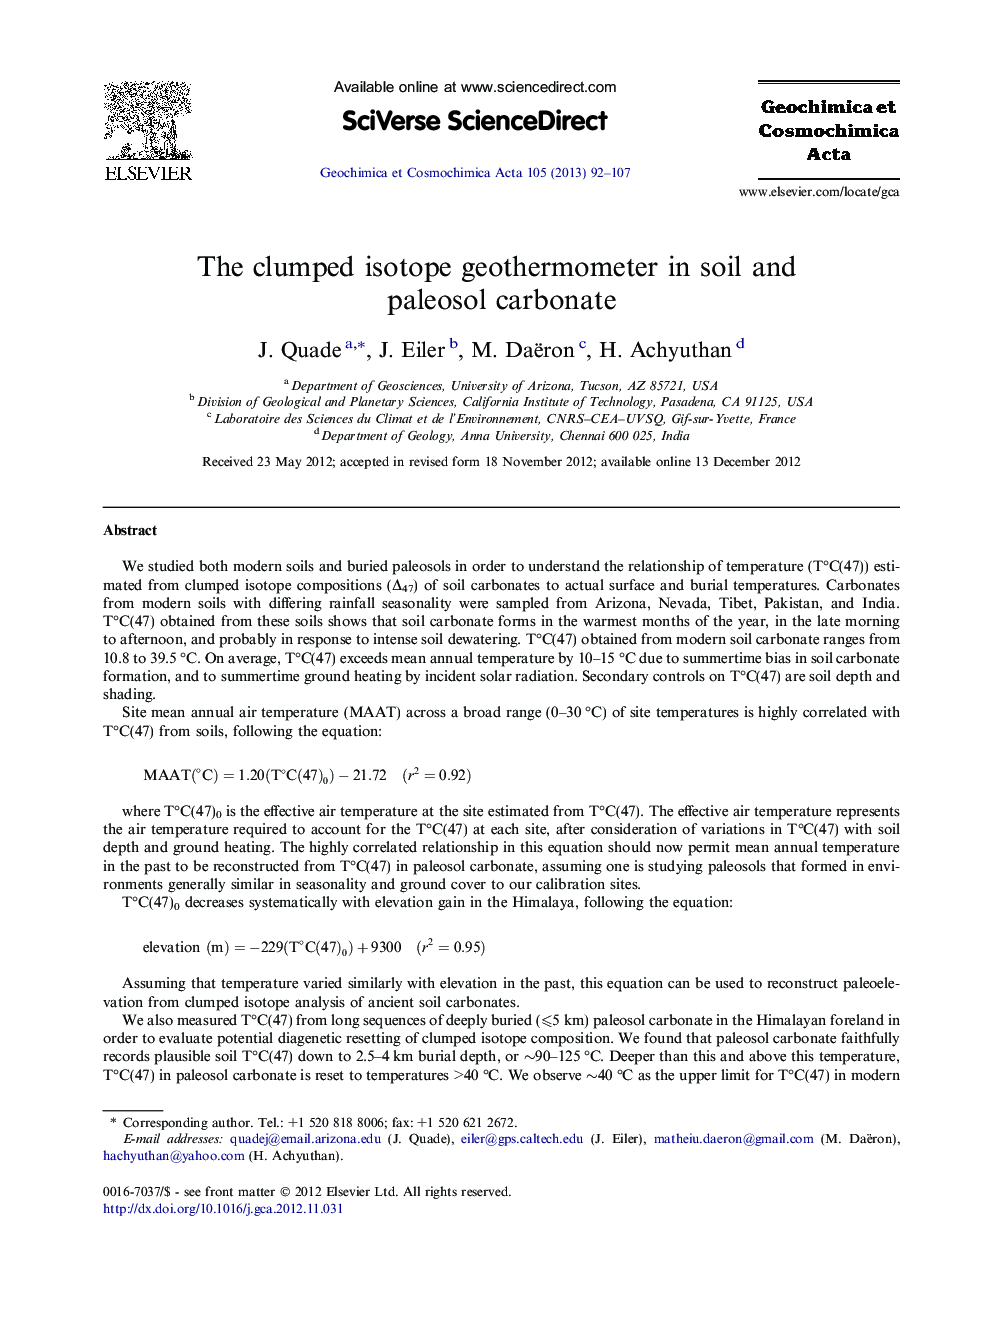 The clumped isotope geothermometer in soil and paleosol carbonate